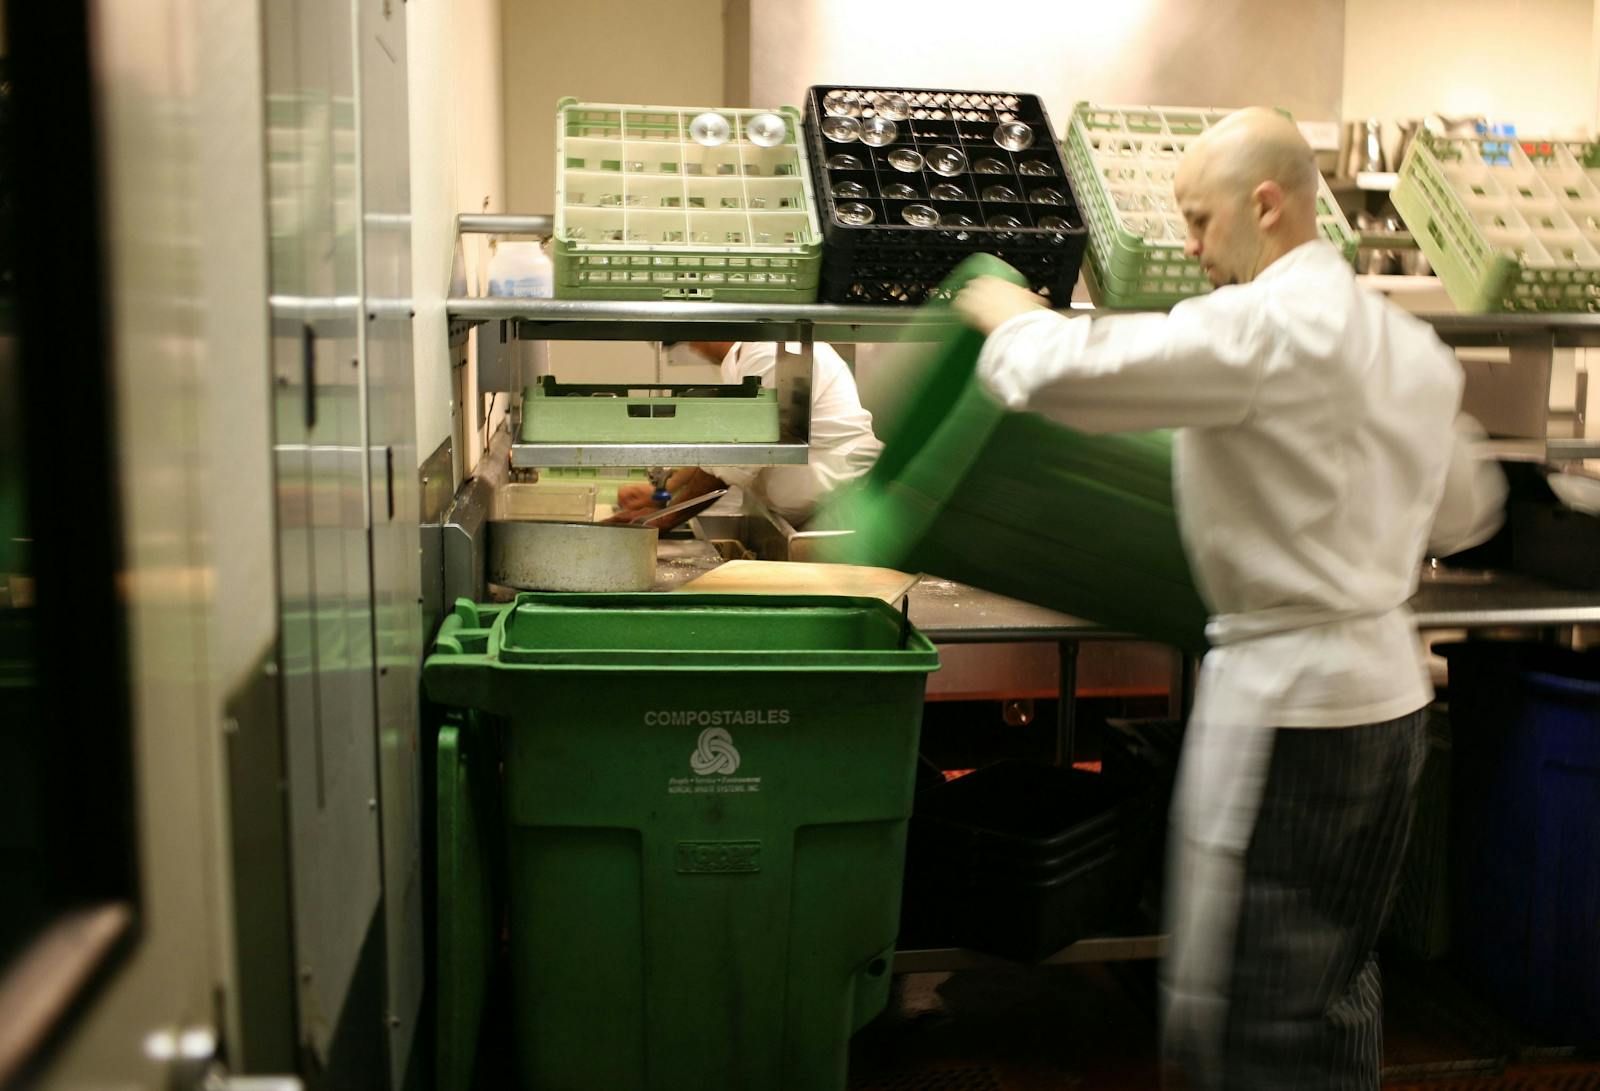 Image of a chef putting food scraps into a compost bin in the kitchen